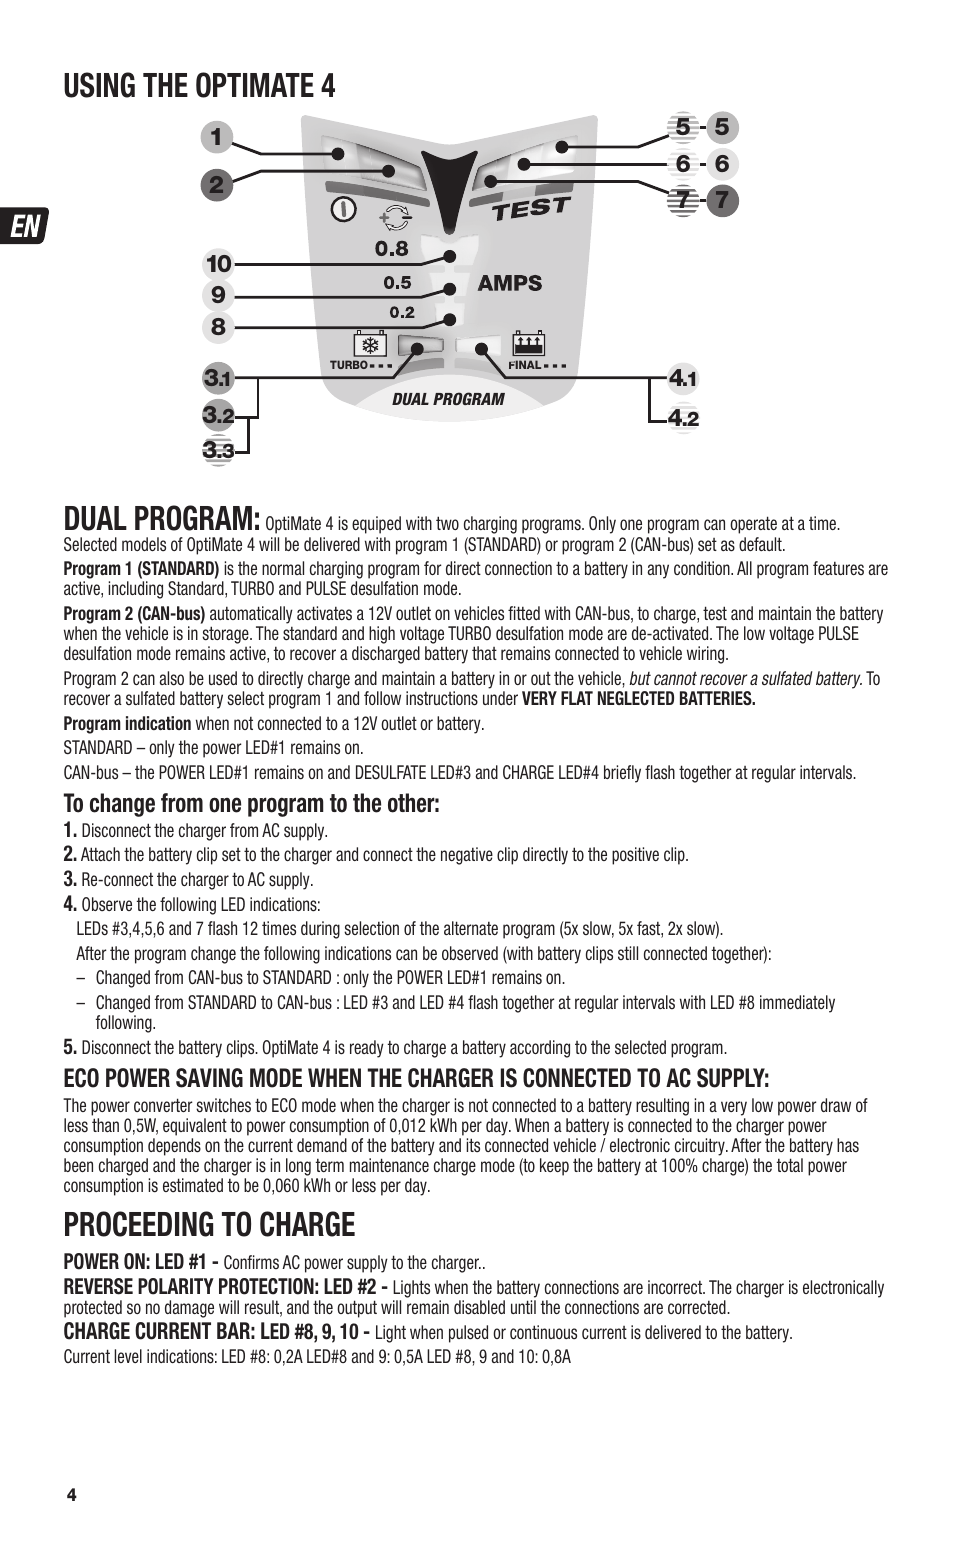 Using the optimate 4, Dual program, Proceeding to charge | TecMate  Optimate4 CAN-bus edition User Manual | Page 4 / 44